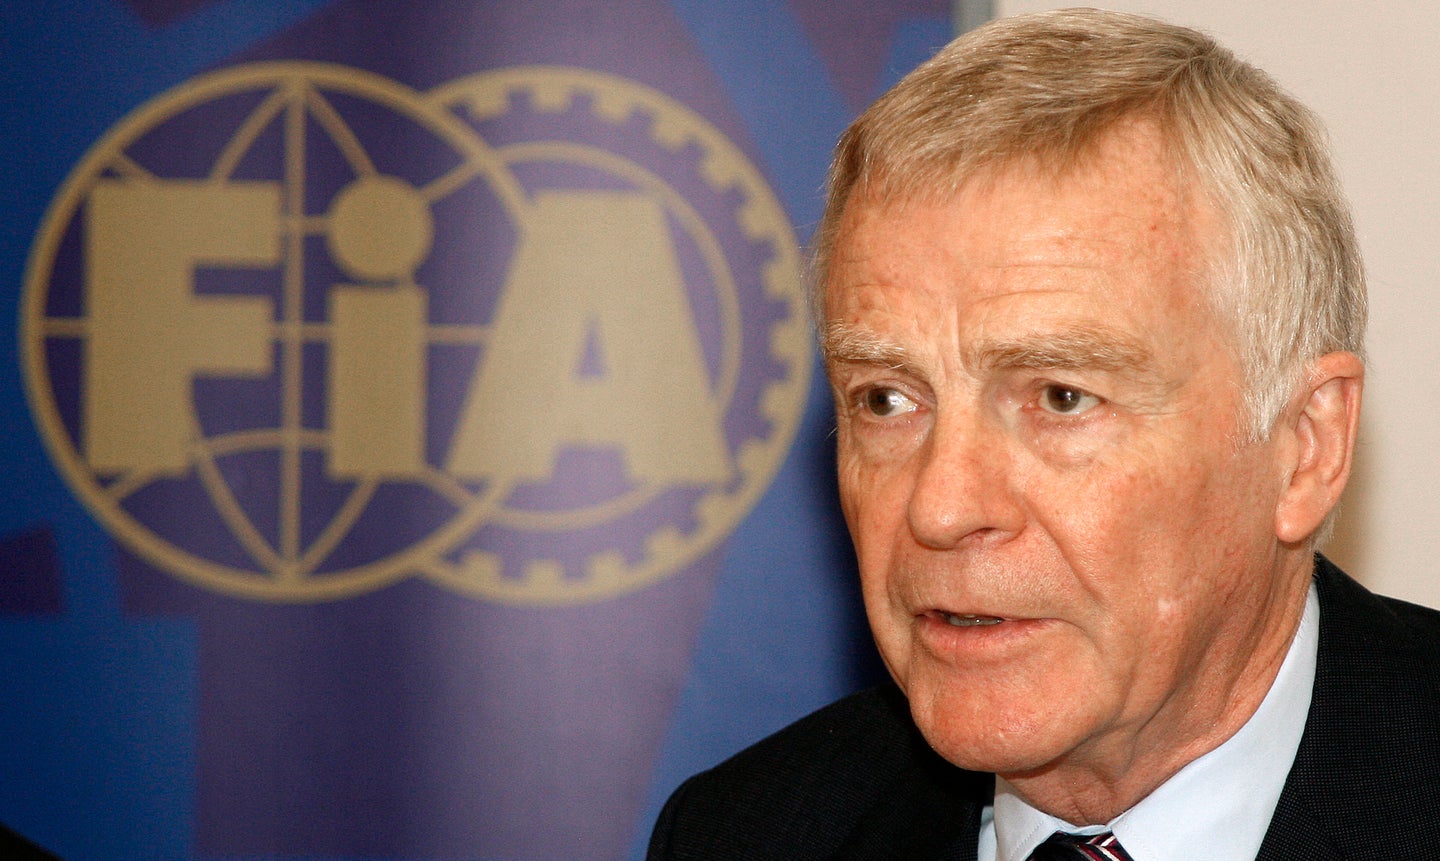 Max Mosley, Former FIA President, Dead at 81